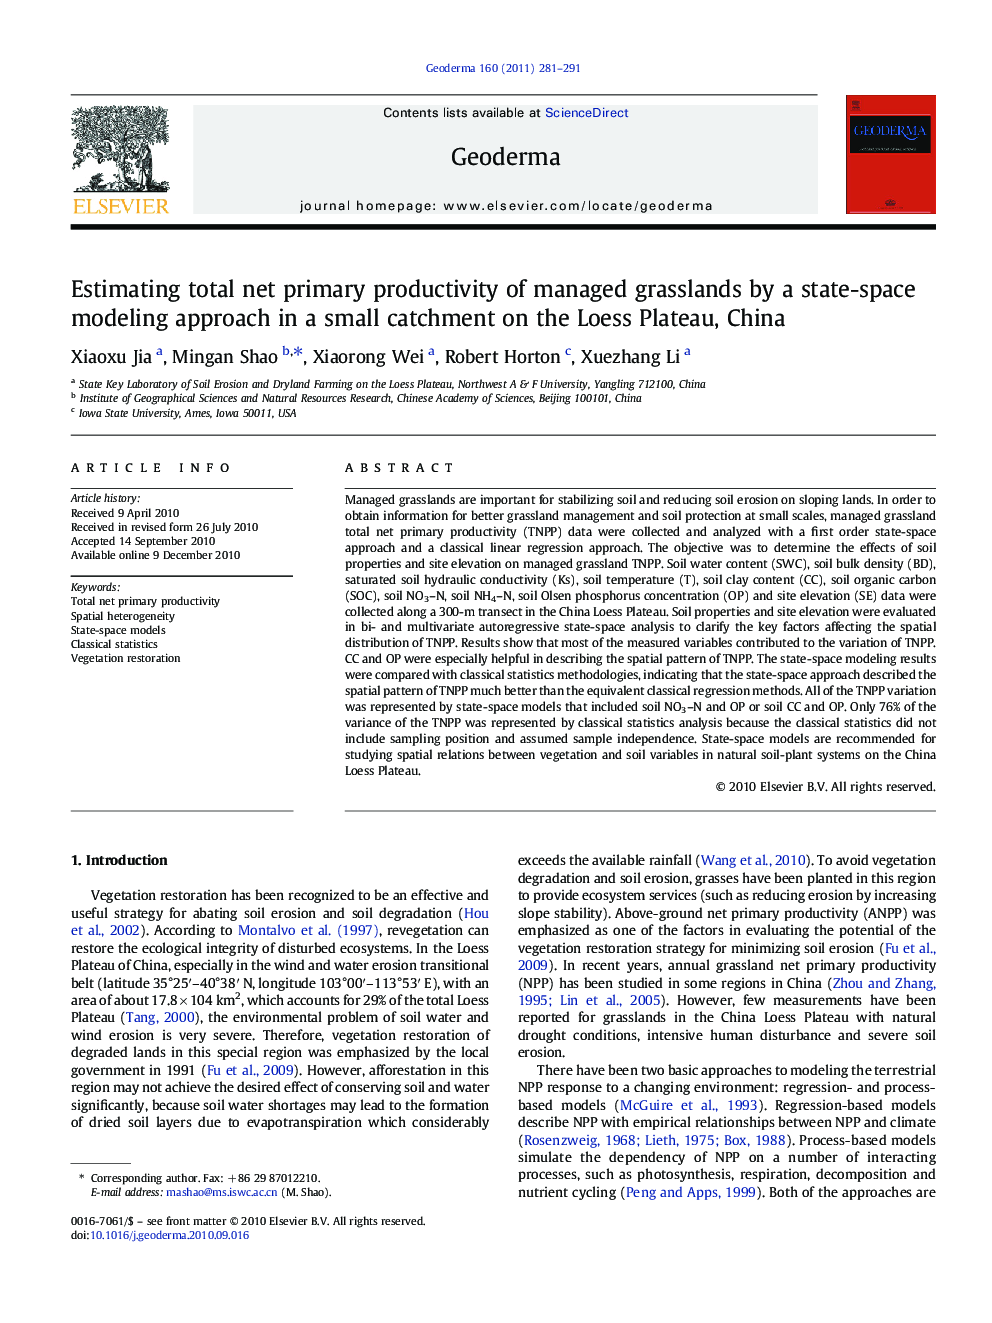 Estimating total net primary productivity of managed grasslands by a state-space modeling approach in a small catchment on the Loess Plateau, China